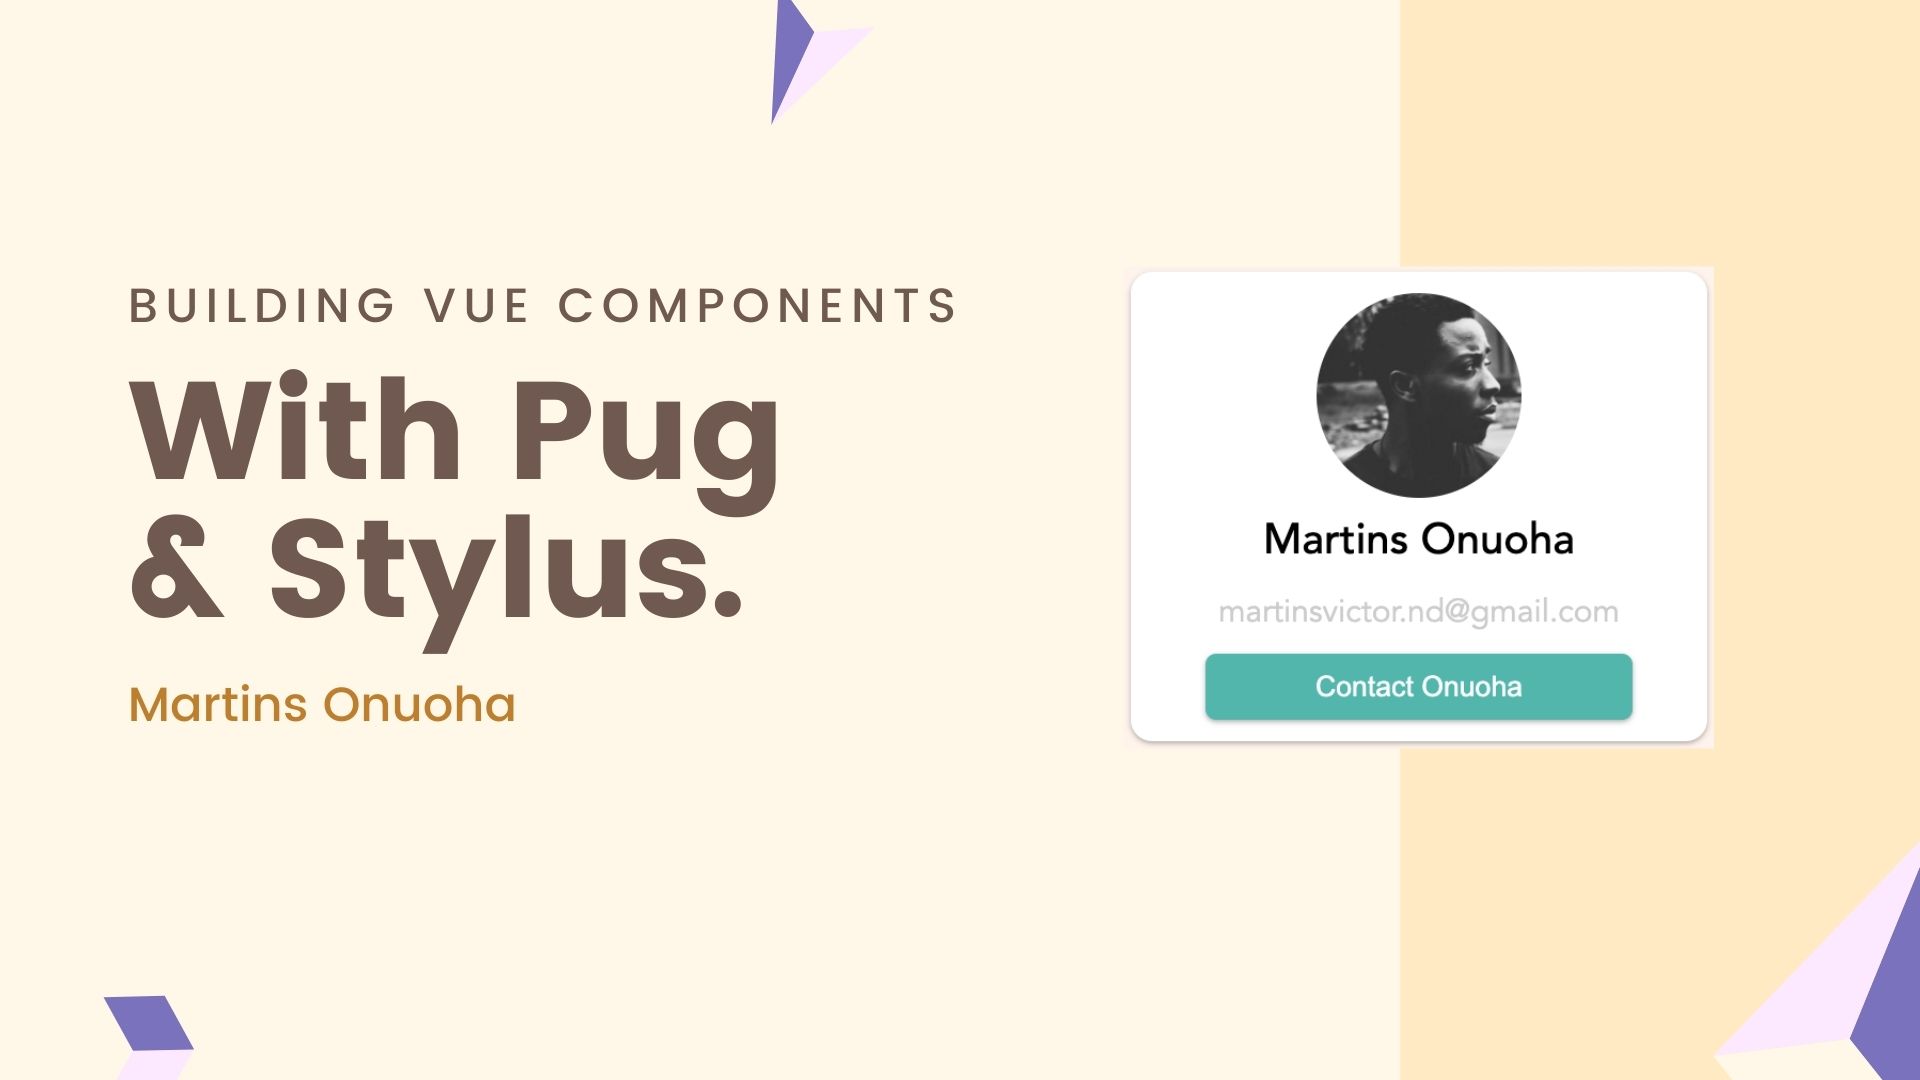 Building Vue Components With Pug & Stylus